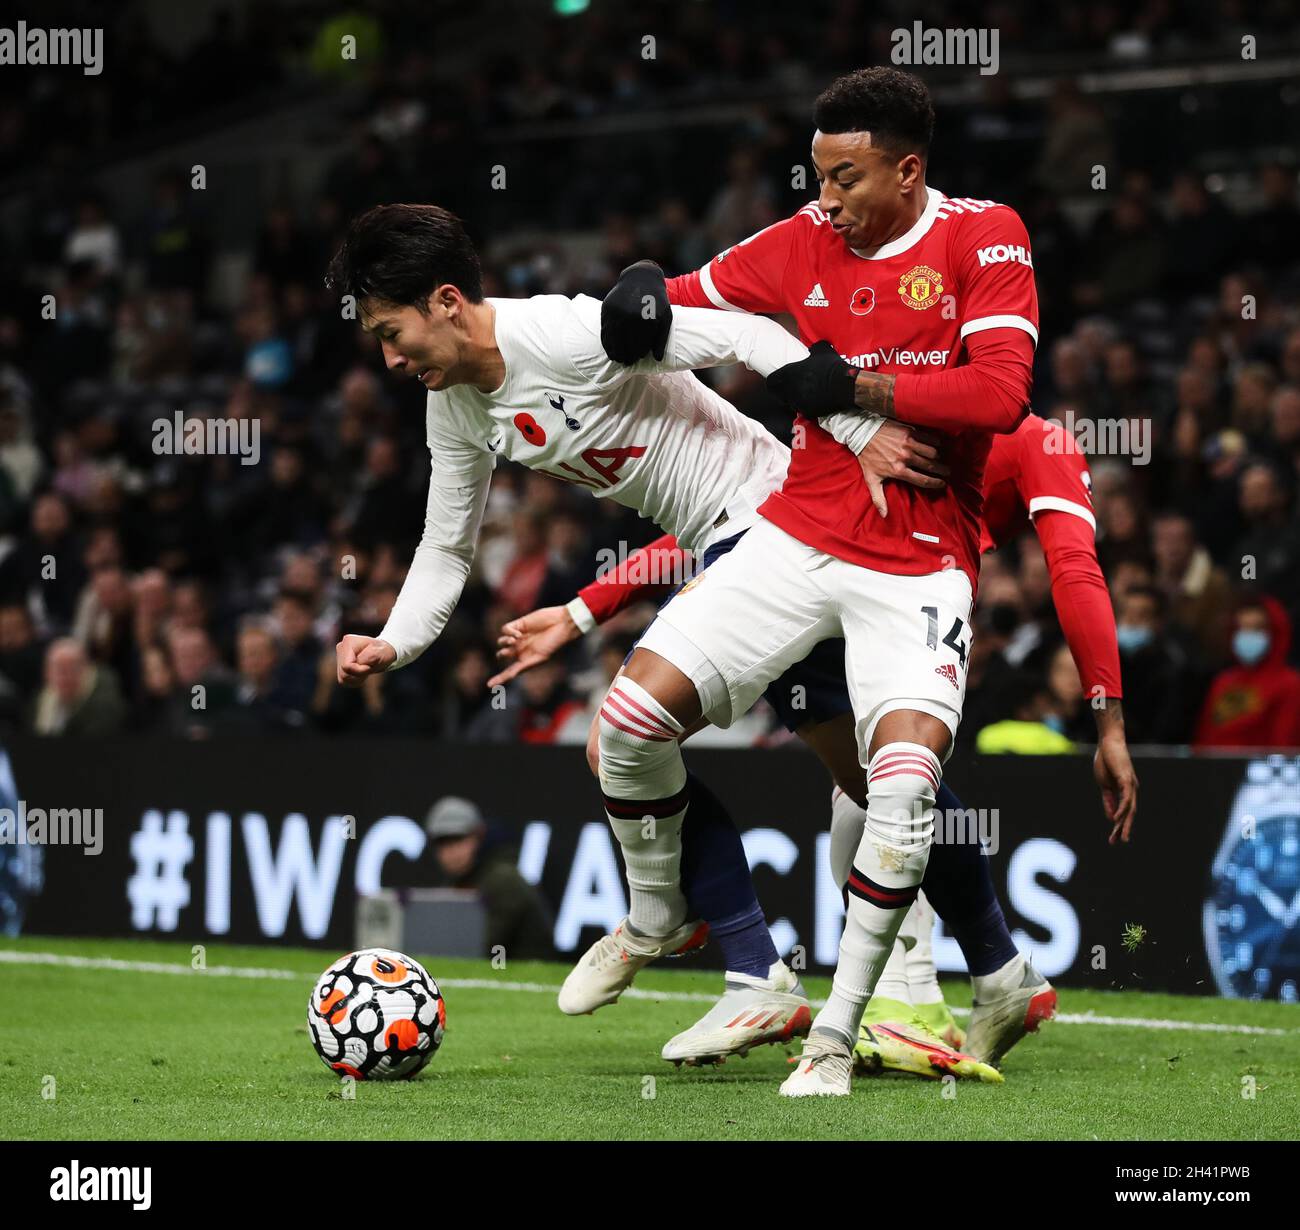 london-england-october-30-son-heung-min-of-tottenham-hotspur-and-jesse-lingard-of-manchester-united-during.-hotspur-and-man.jpg